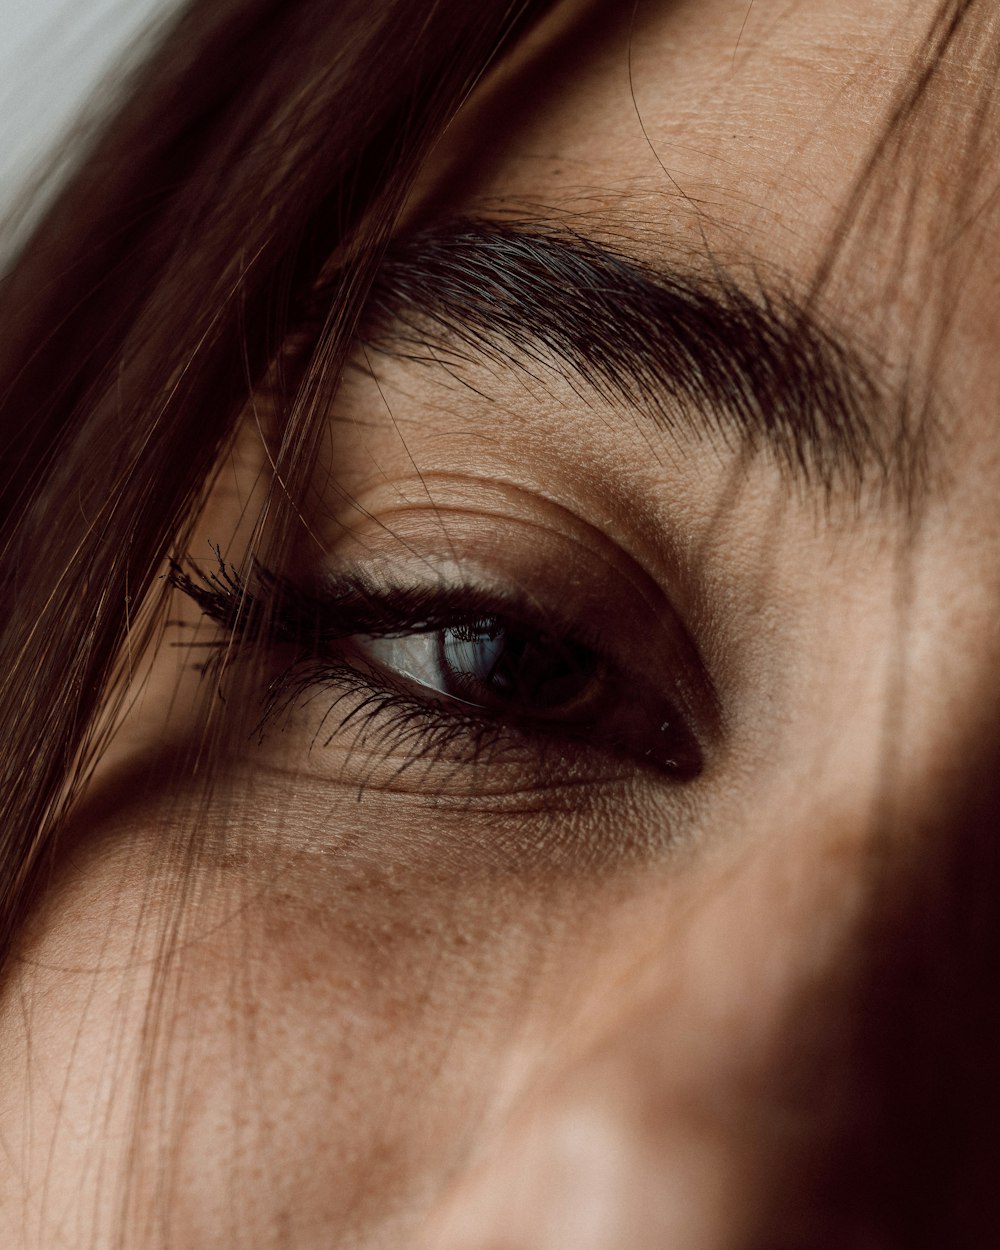 a close up of a person's eye with long hair